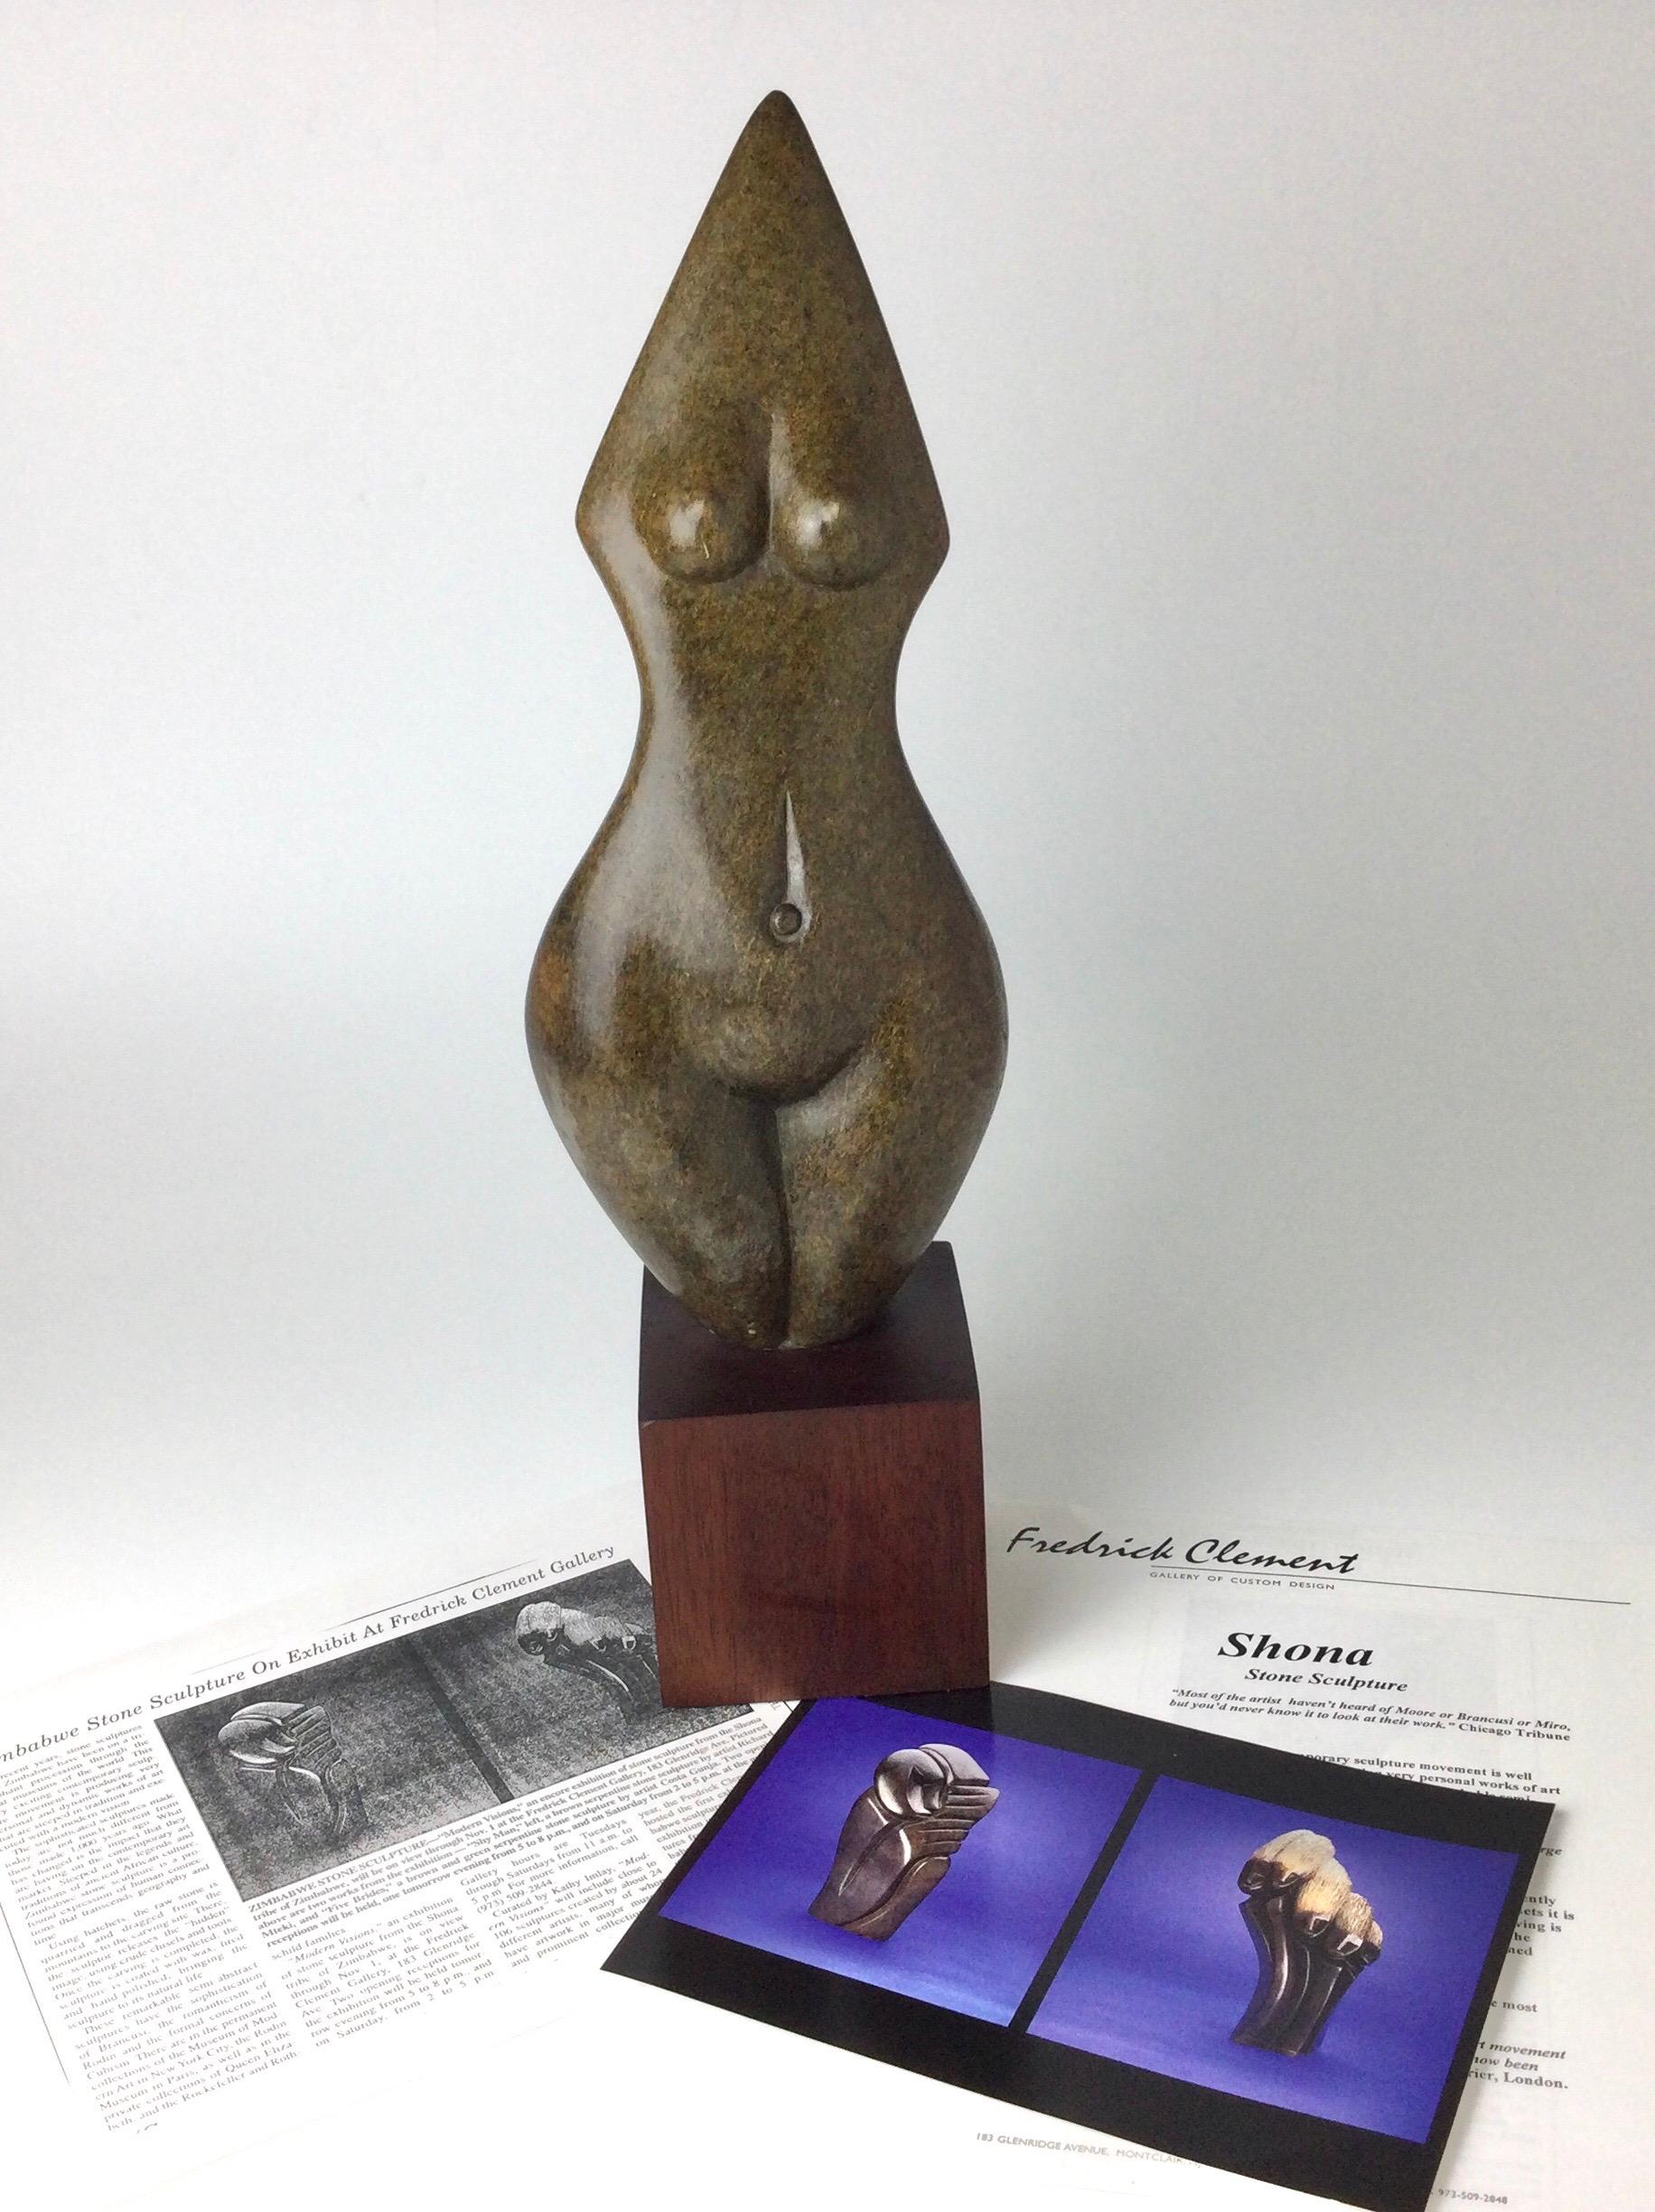 Wonderful carved brown serpentine stone by Mitsiati Kagore. Acquired from the Fredrick Clement Gallery Montclair NJ in 2000. It was shown in there “Modern Visions” exhibit of Zimbabwe Stone Sculpture. Stands on wood base 18” tall by 5 1/2” wide by